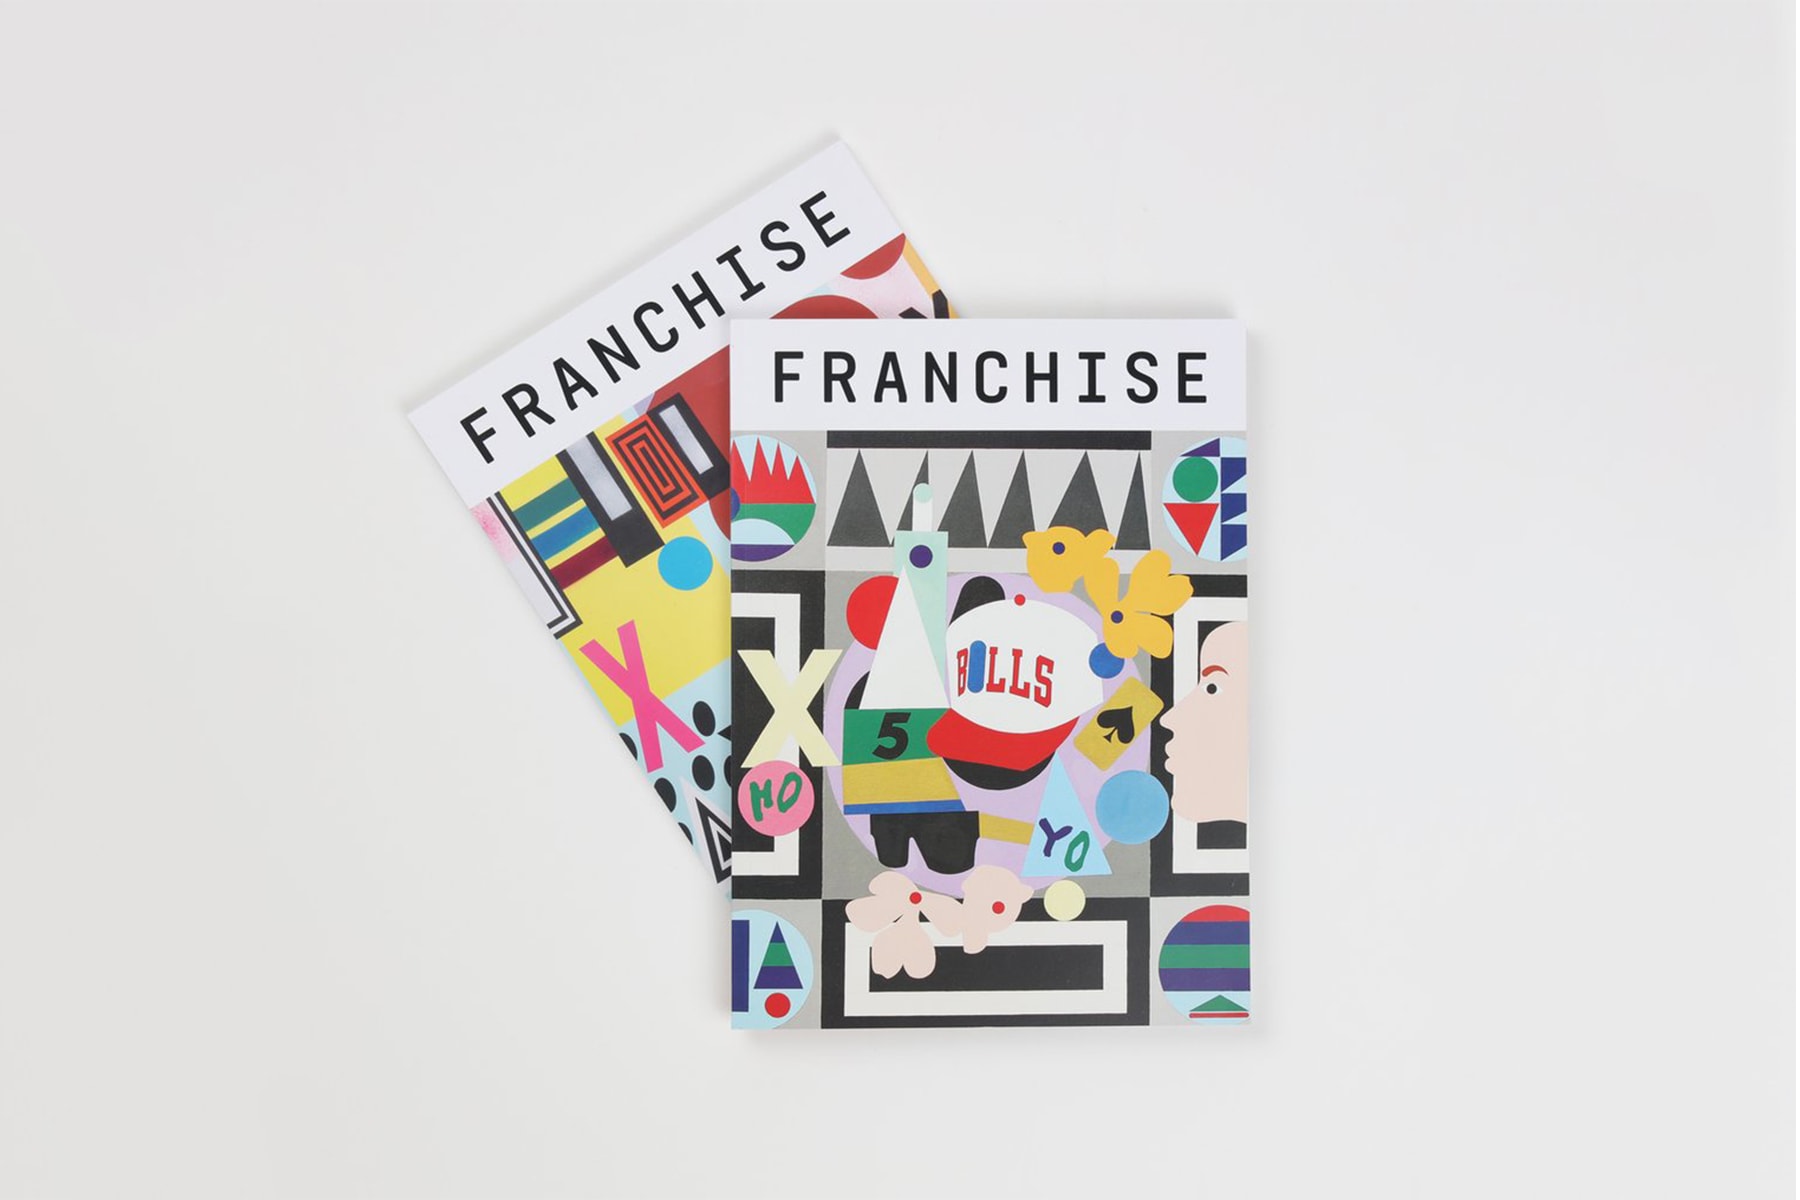 Franchise Magazine Releases Issue 4 Fourth Edition blog basketball culture diplo